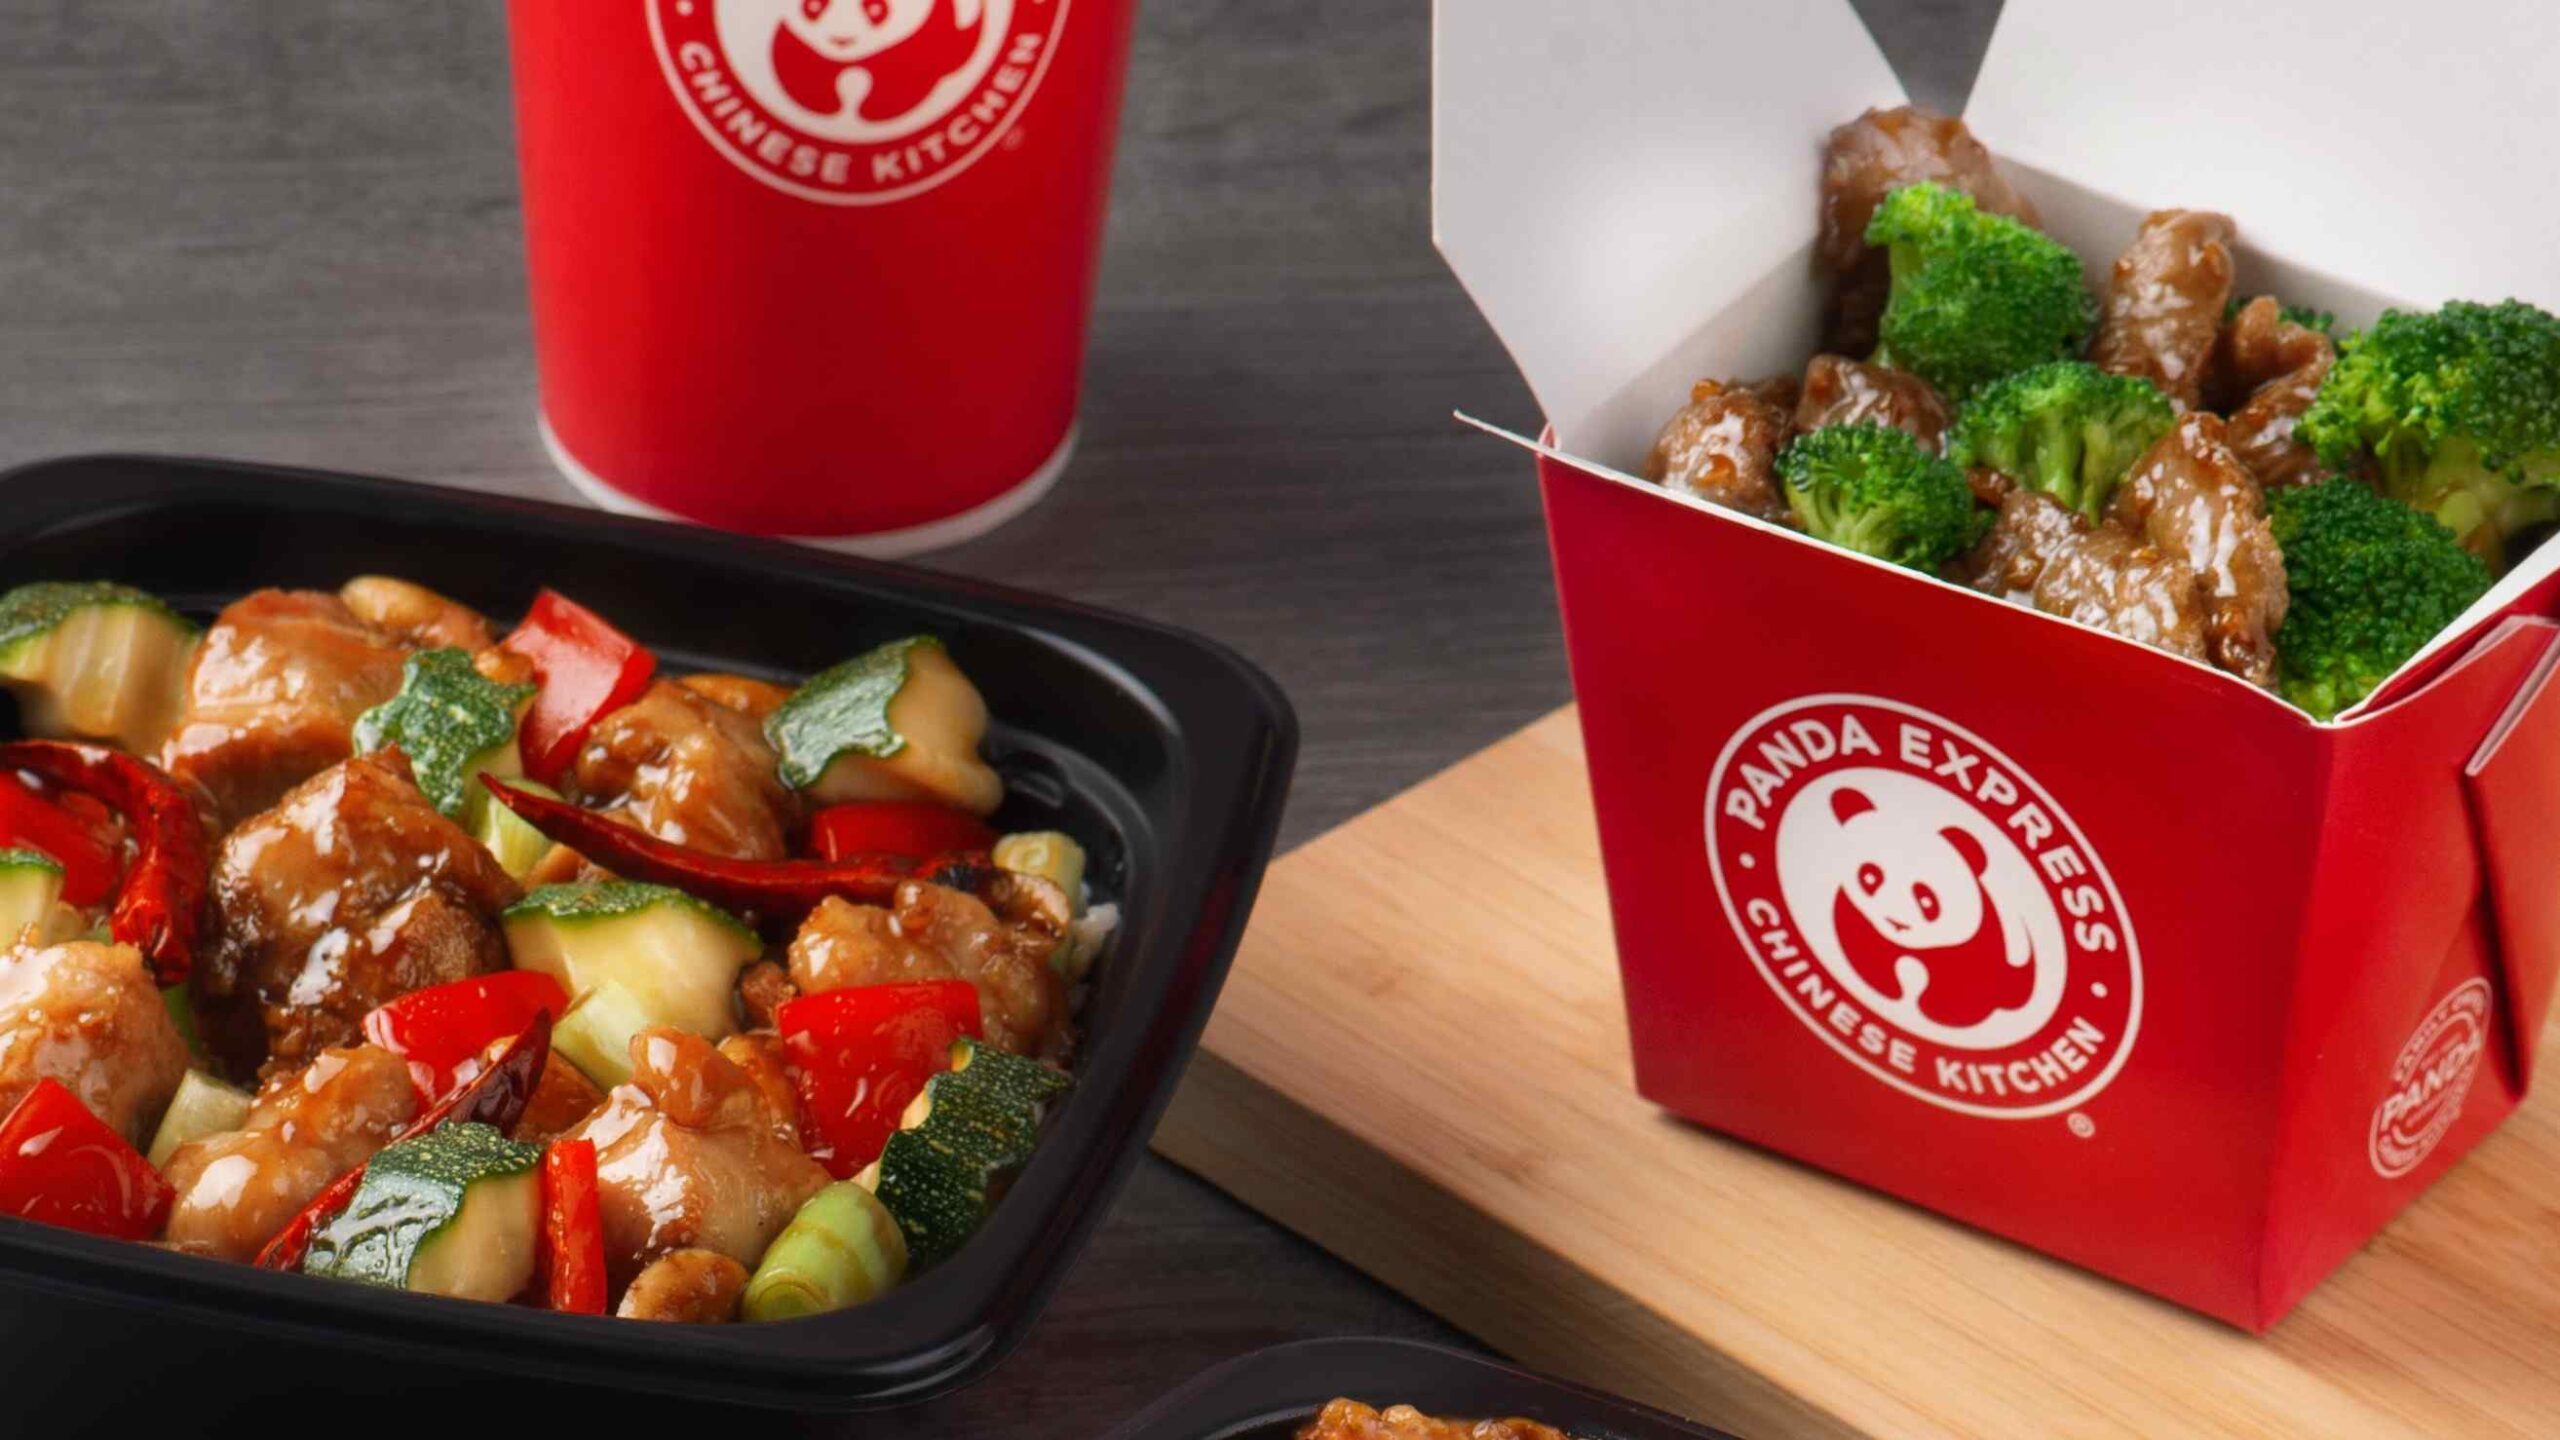 LOOK: Here’s what’s going to be on the Panda Express Manila menu